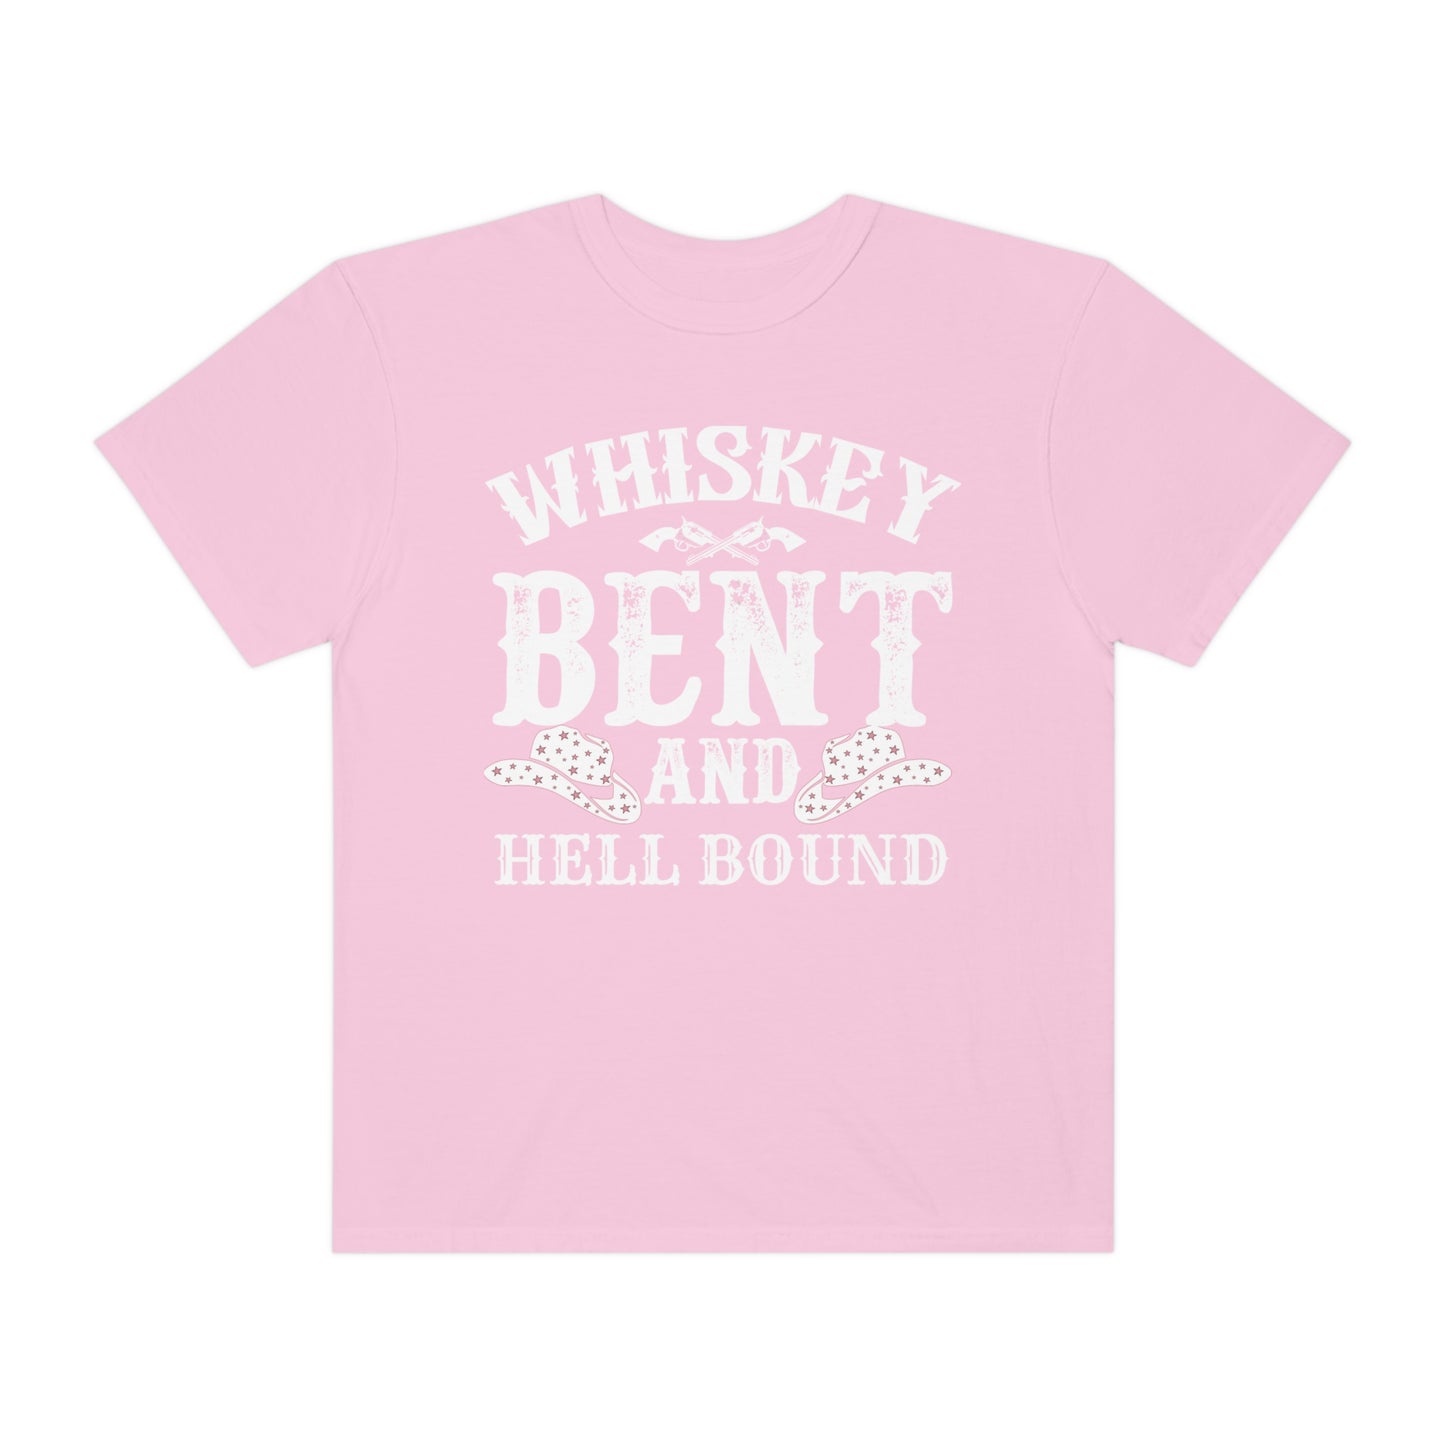 Whiskey Bent And Hell Bound Shirt